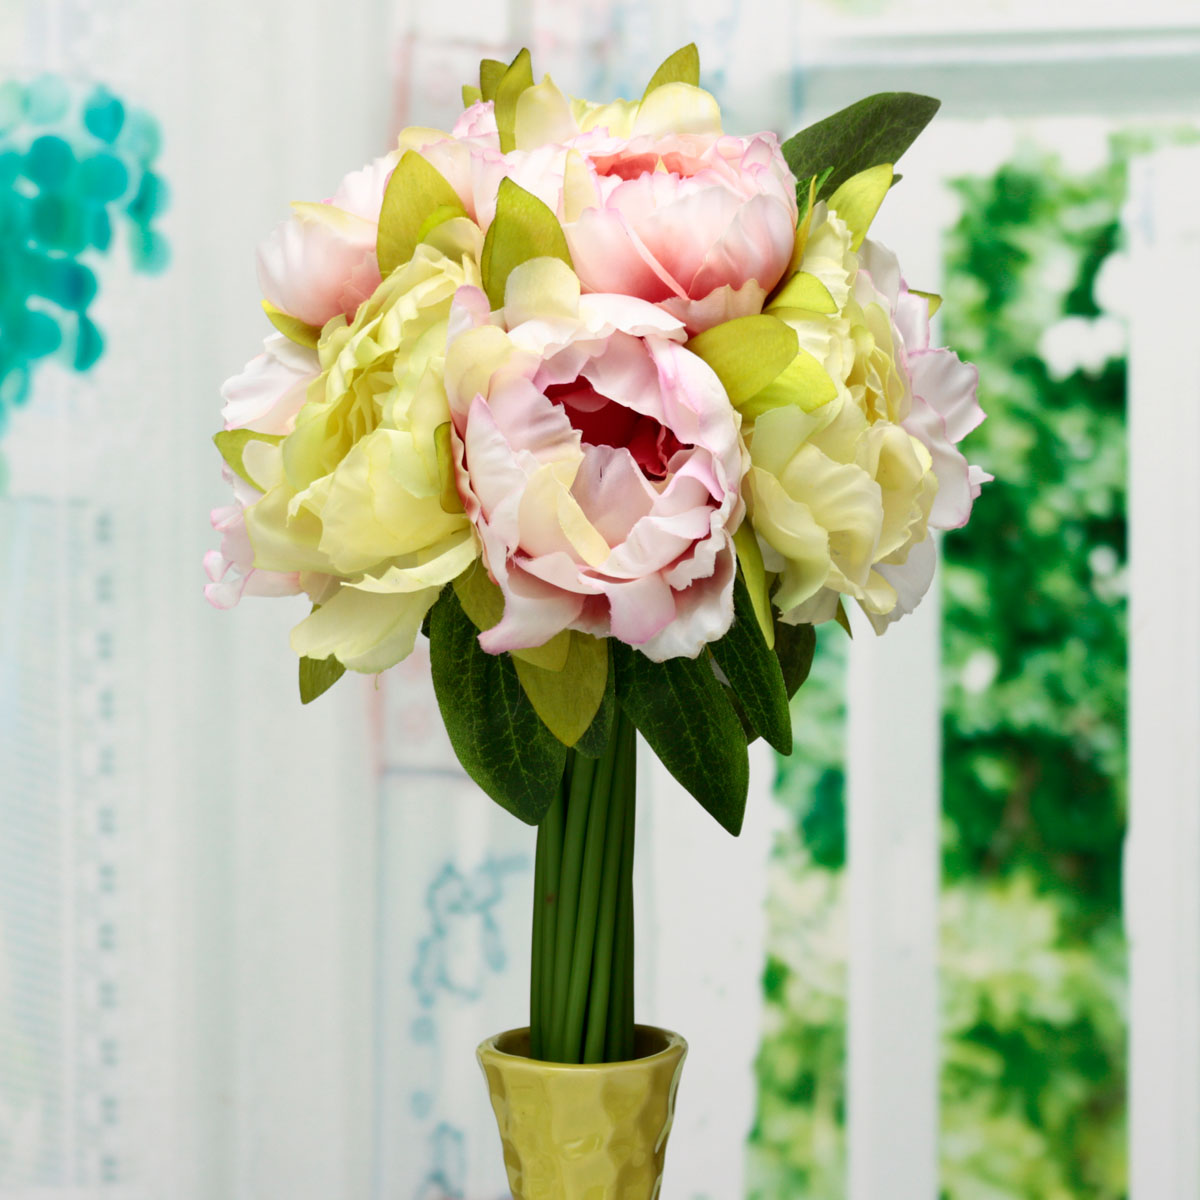 10-Heads-Artificial-Silk-Flower-Peony-Wedding-Bouquet-Party-Home-Decoration-1036707